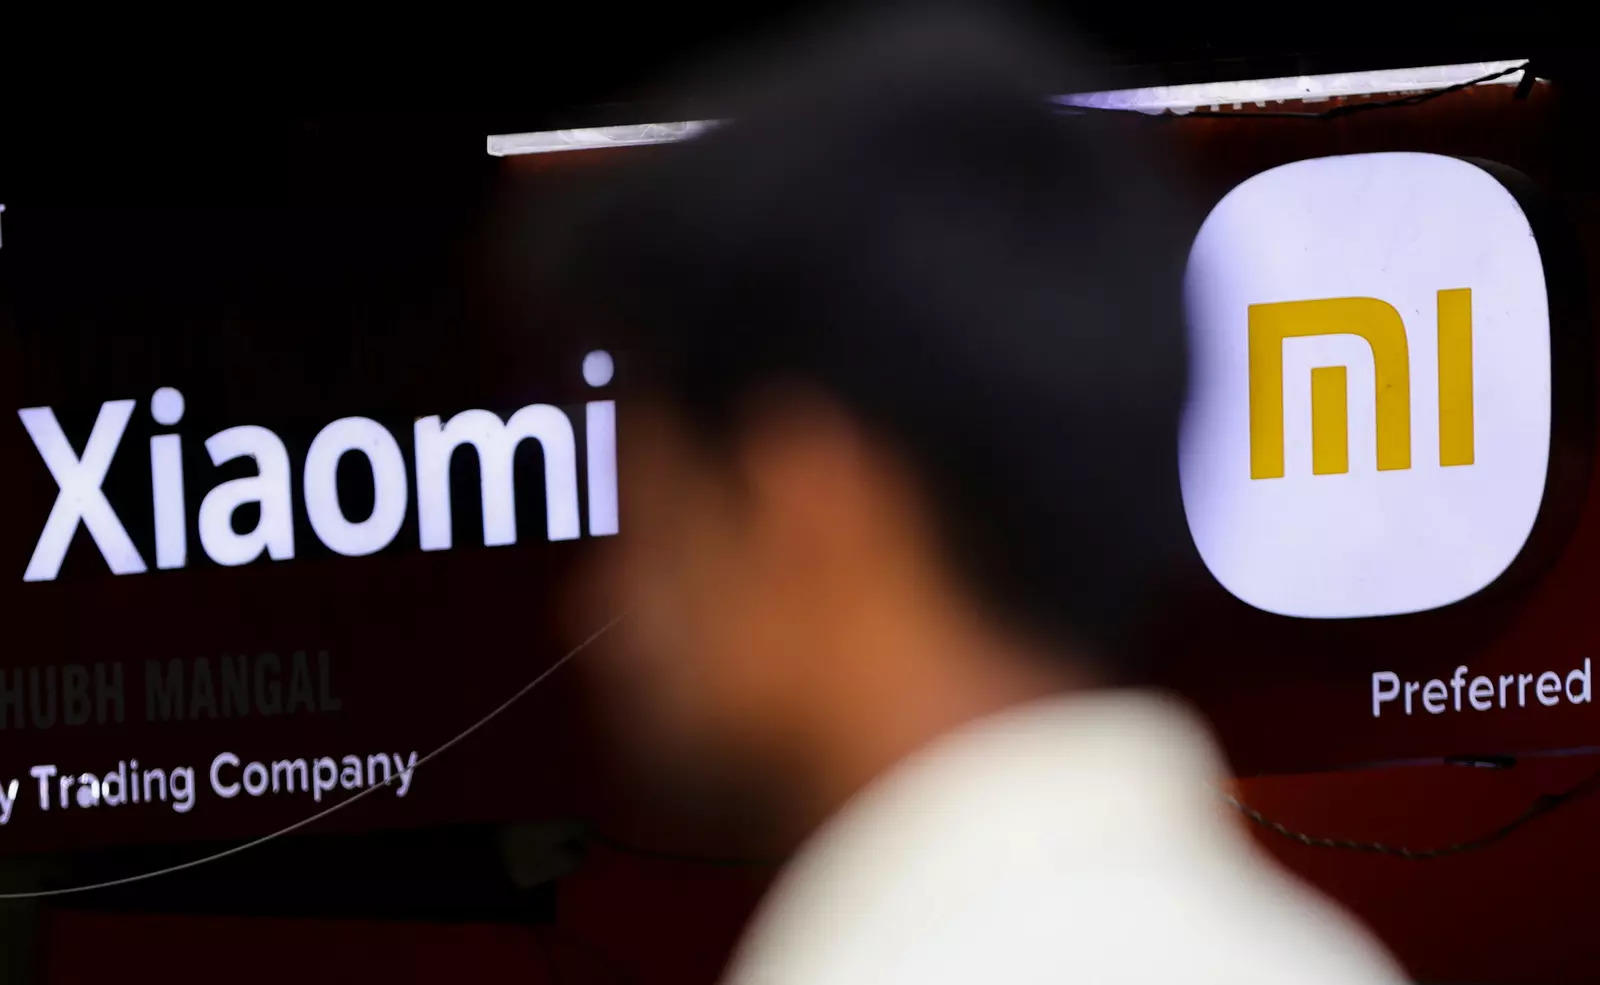 Redmi 10A Sport was launched in India this week with minor upgrades over the Redmi 10A  Image source Reuters